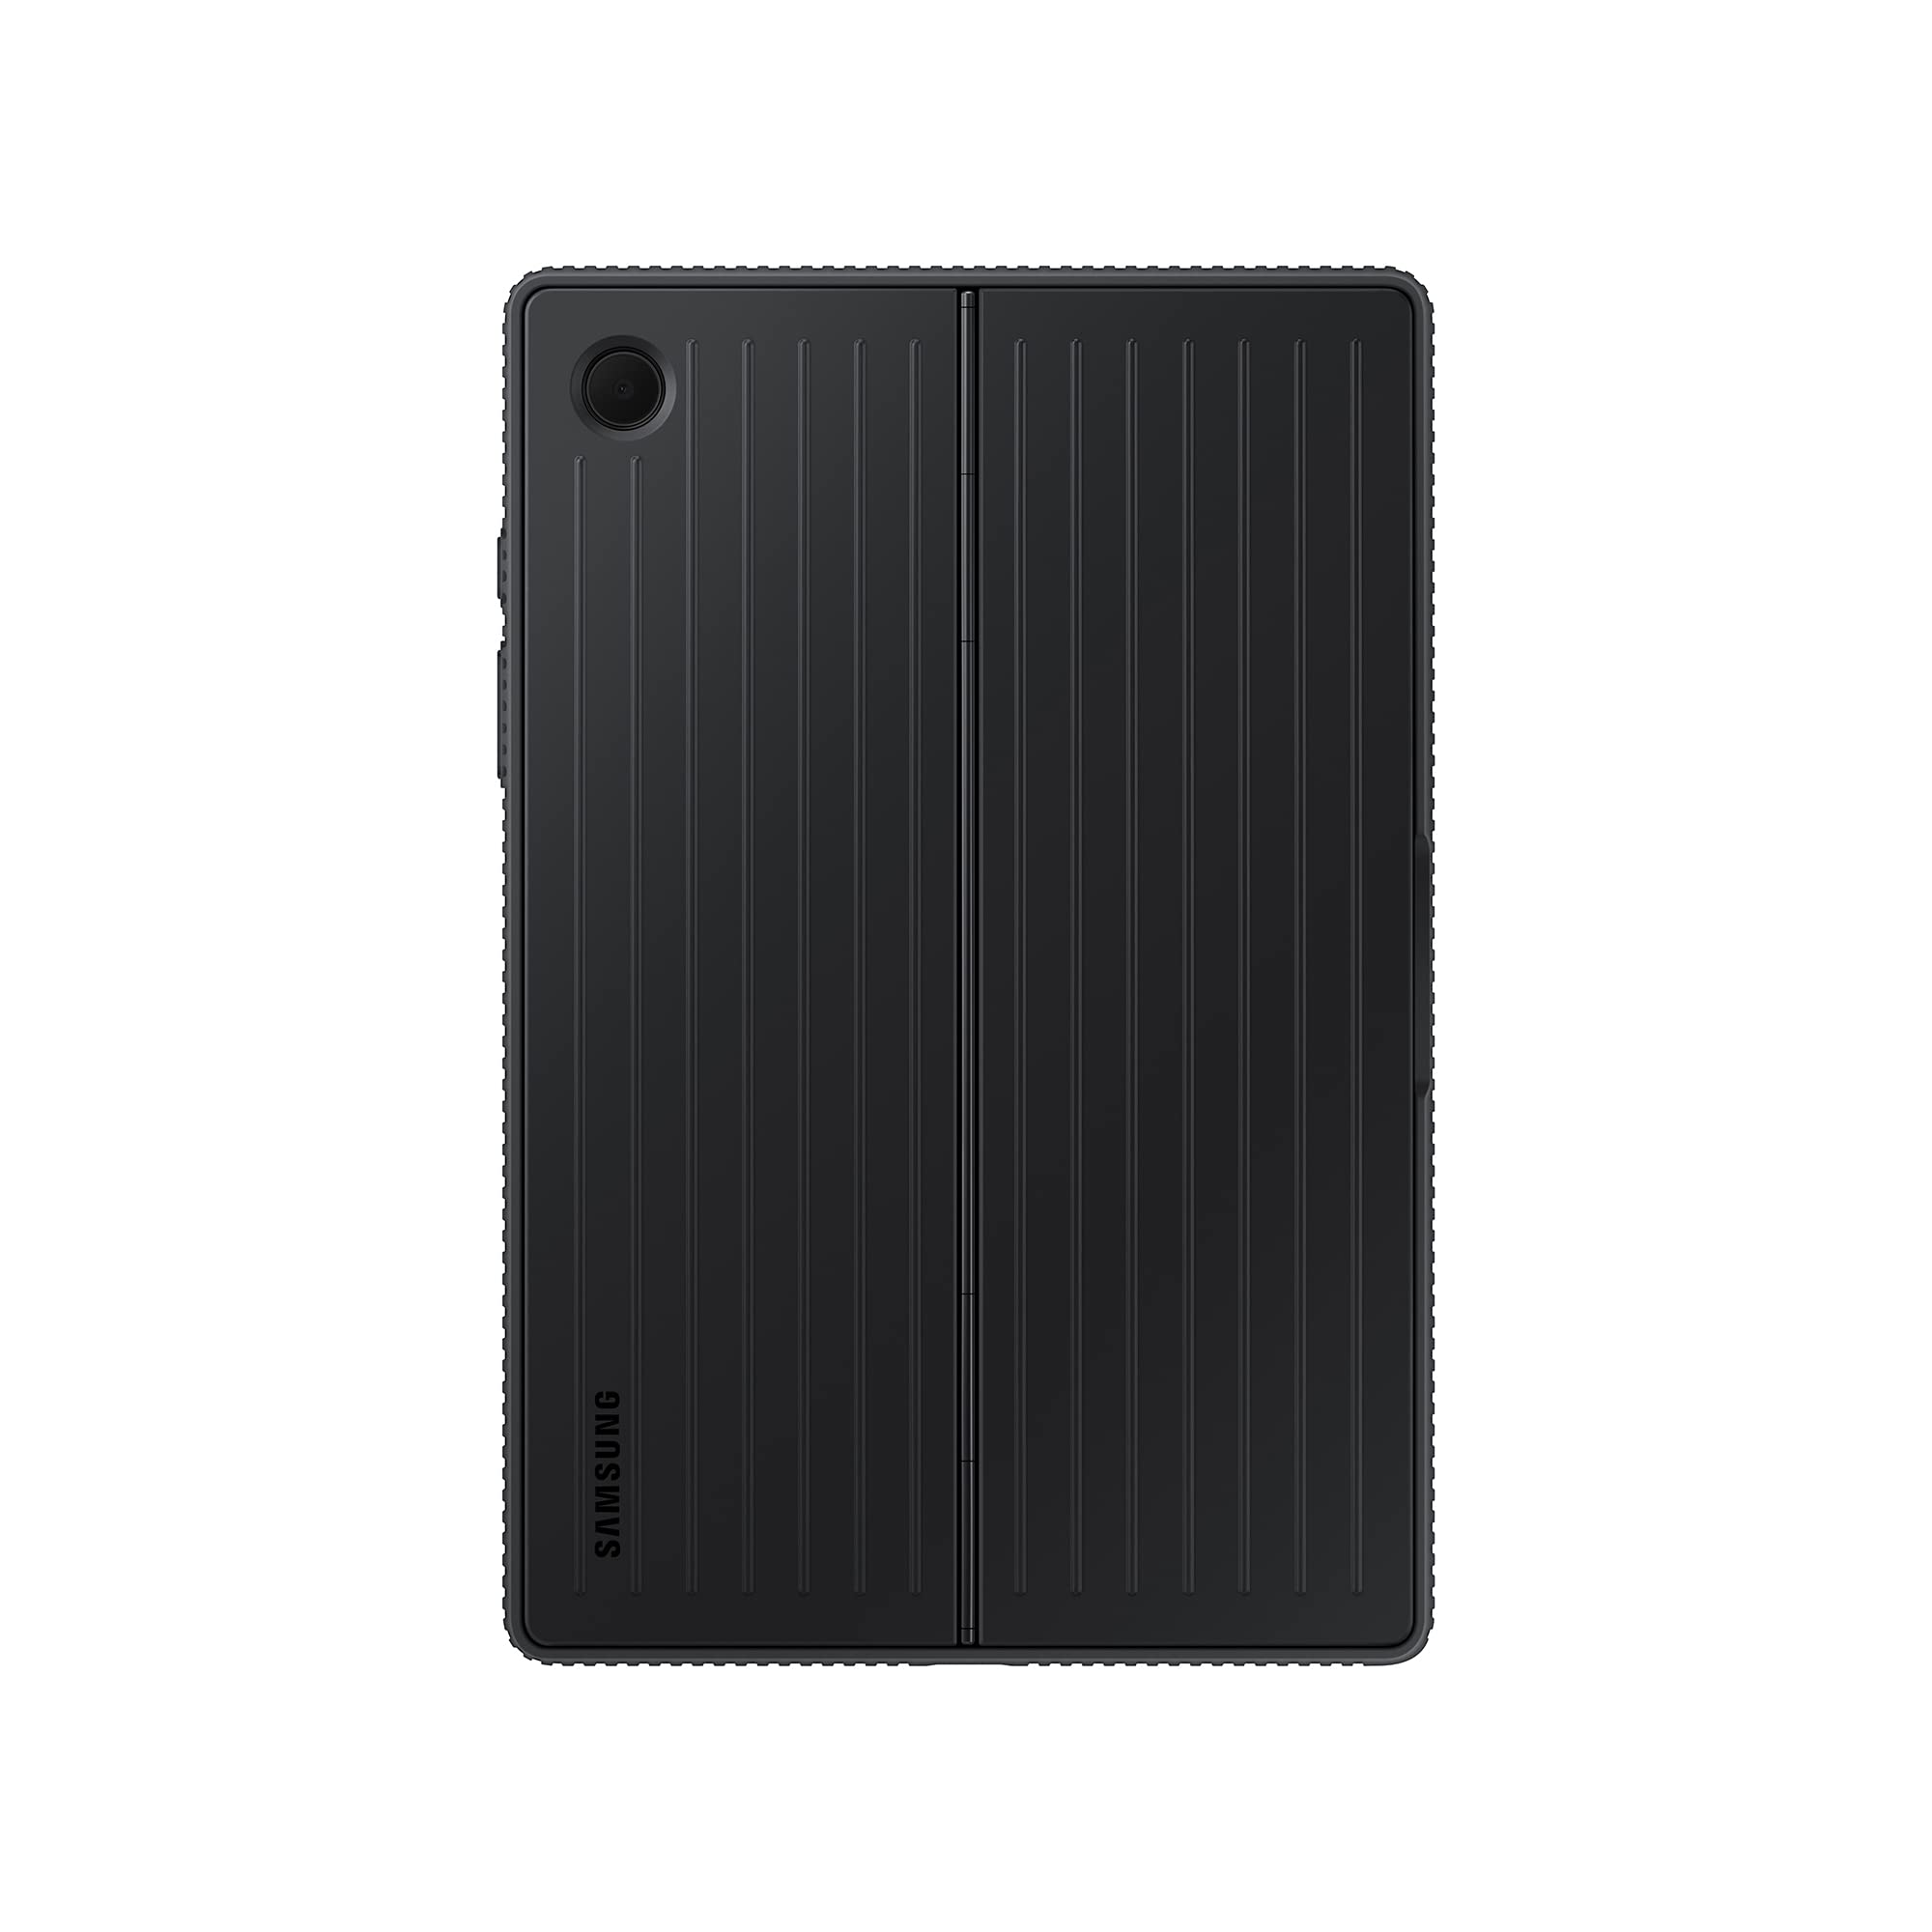 Samsung Galaxy Tab A8 Protective Standing Cover - Official Samsung Tablet Case - Black